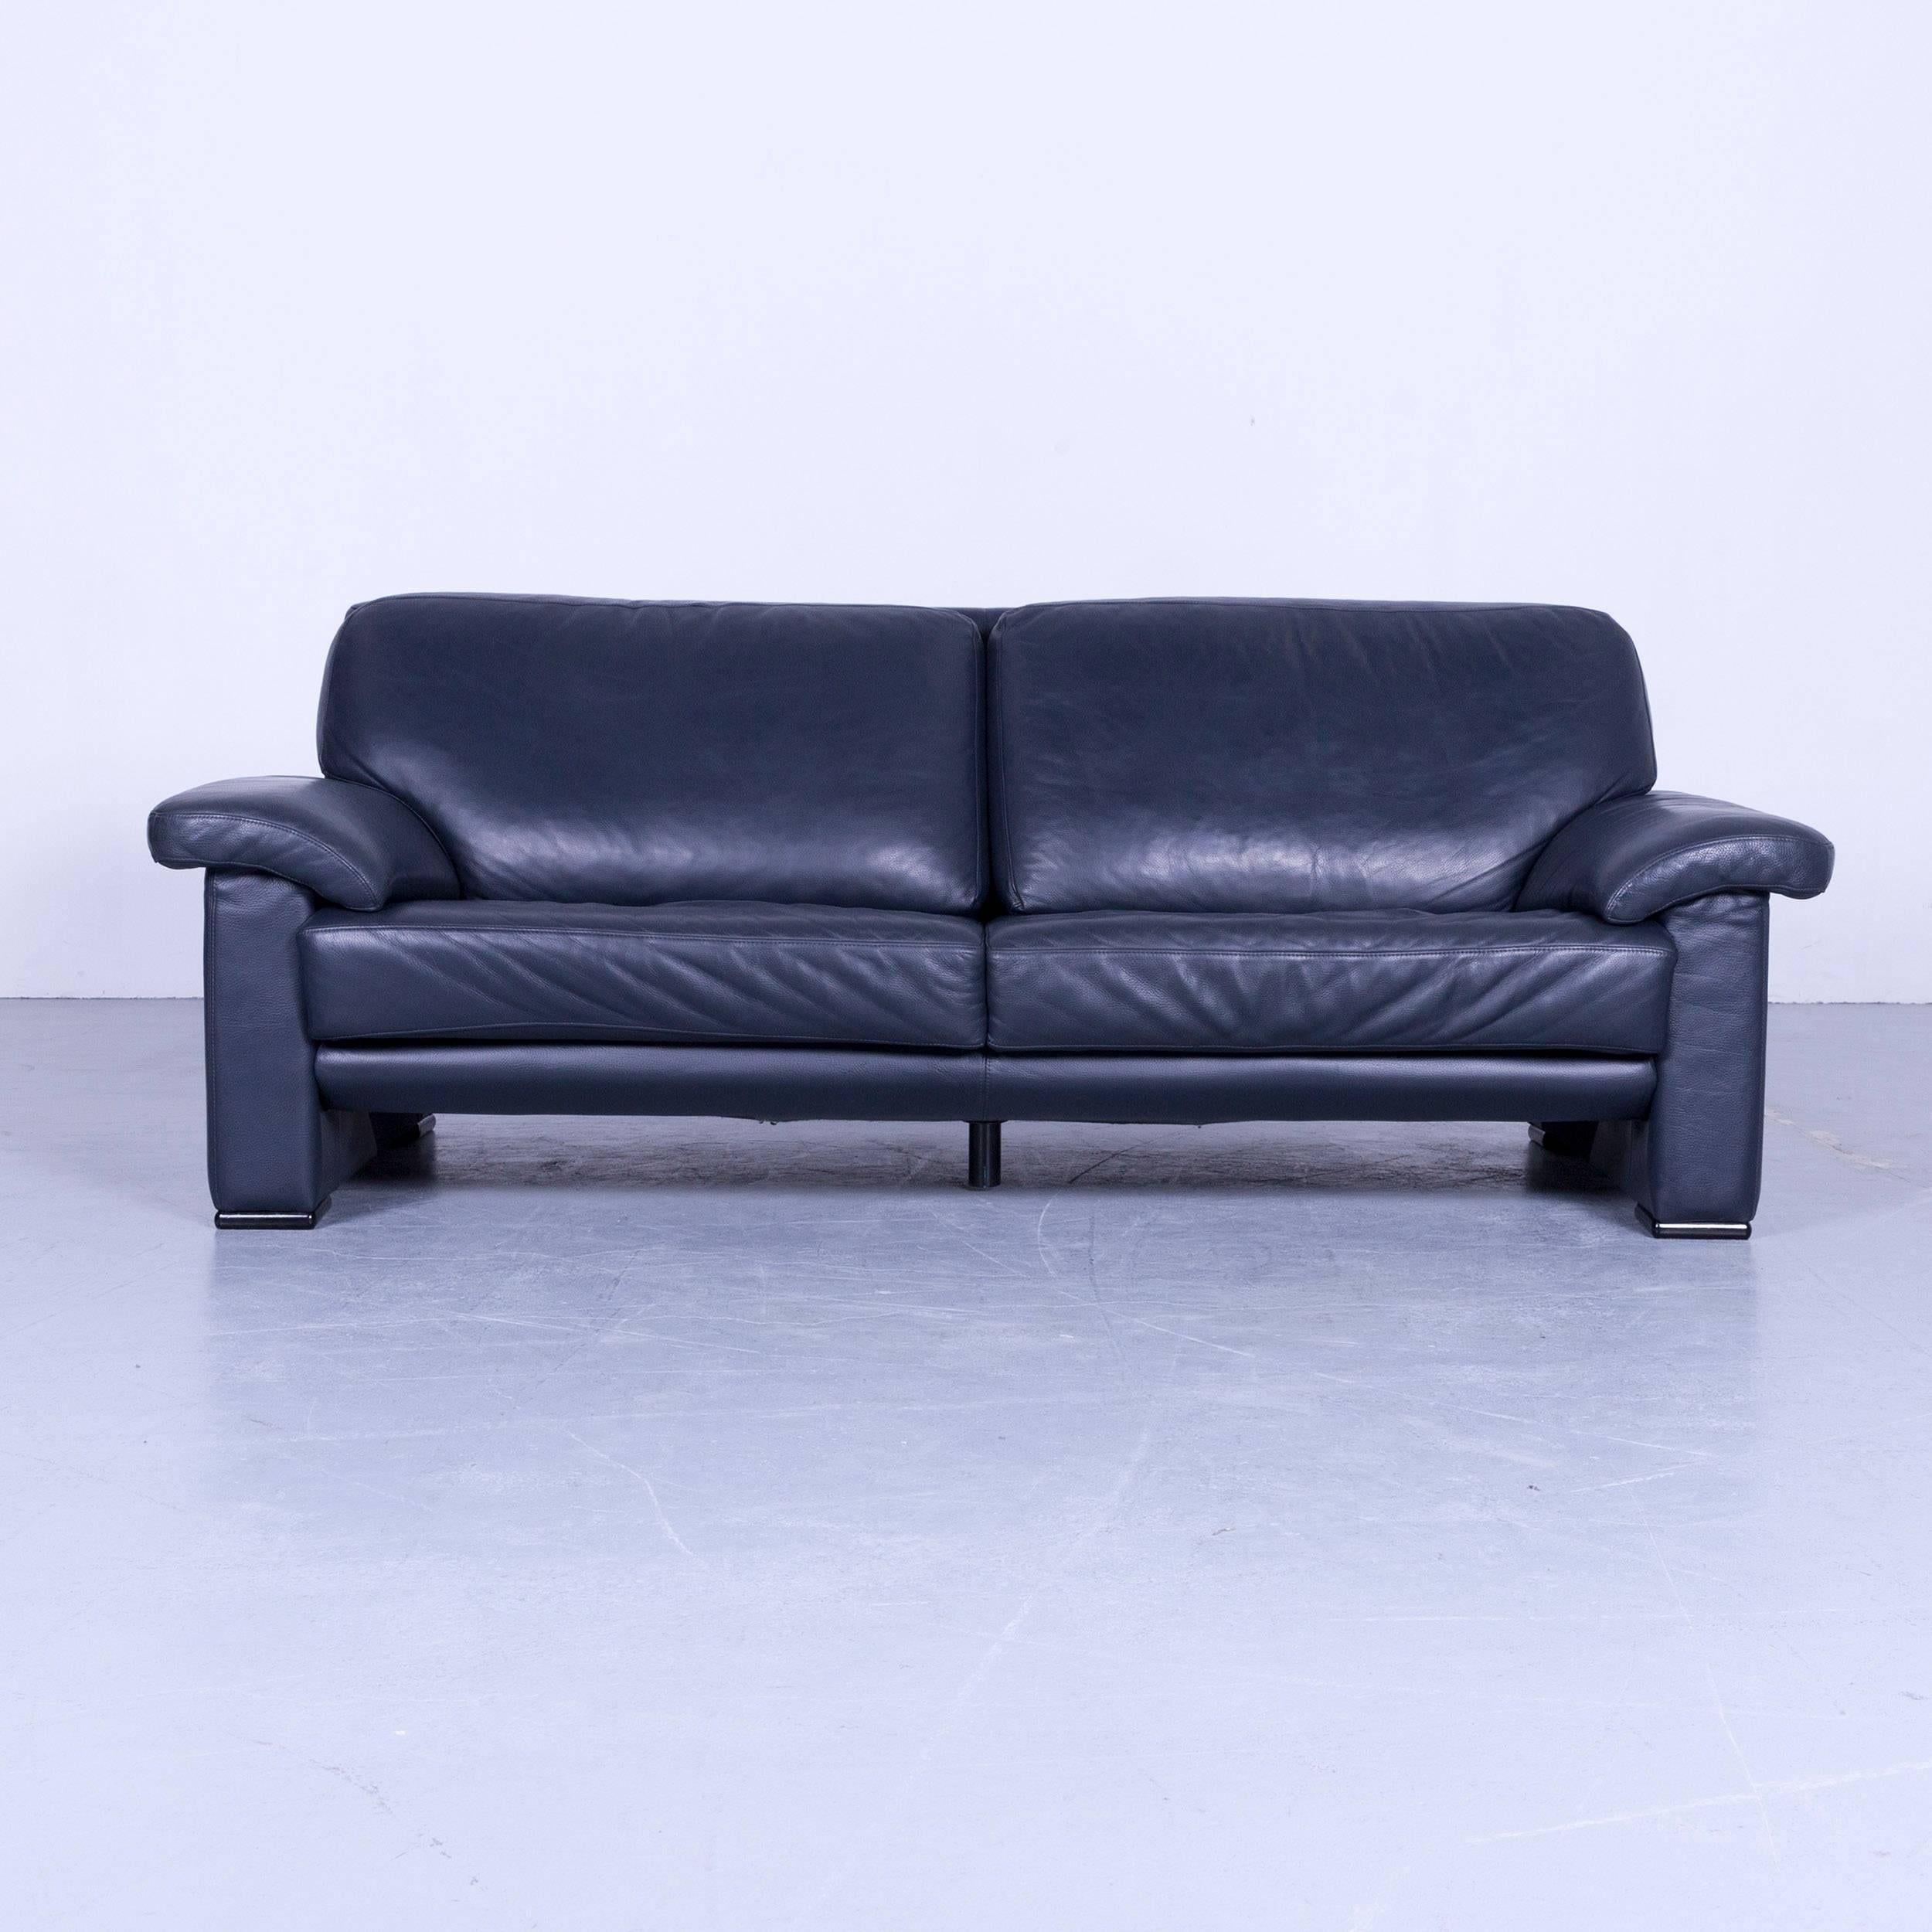 Ewald Schillig designer sofa set blue leather, in a minimalistic and modern design, made for pure comfort and style.